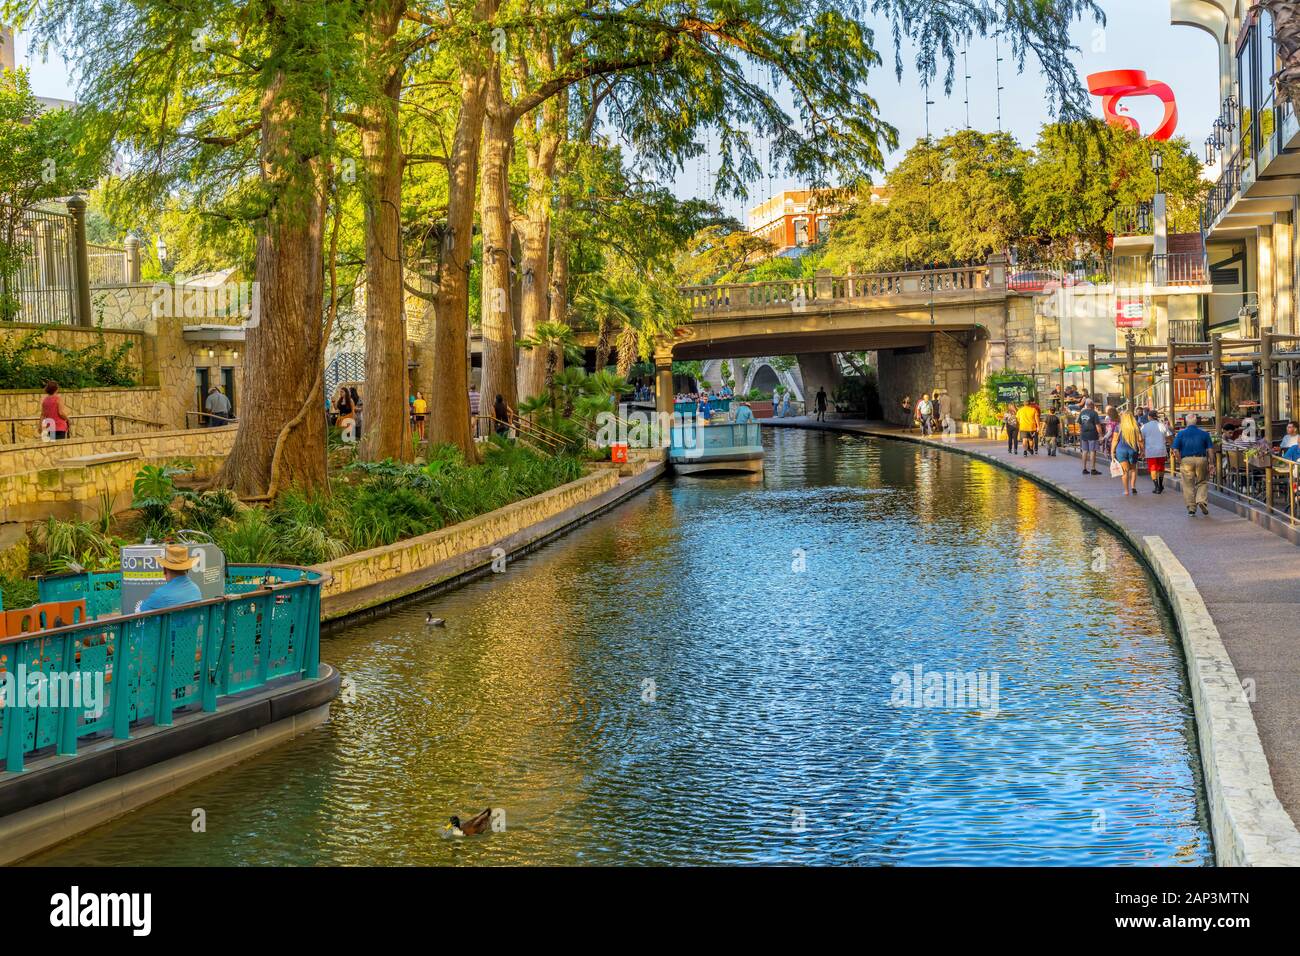 Tour Boats Sidewalks Tourists Reflection River Walk San Antonio Texas 15 Mile River Walk Created In The 1960s To Deal With Flood Problem Stock Photo Alamy